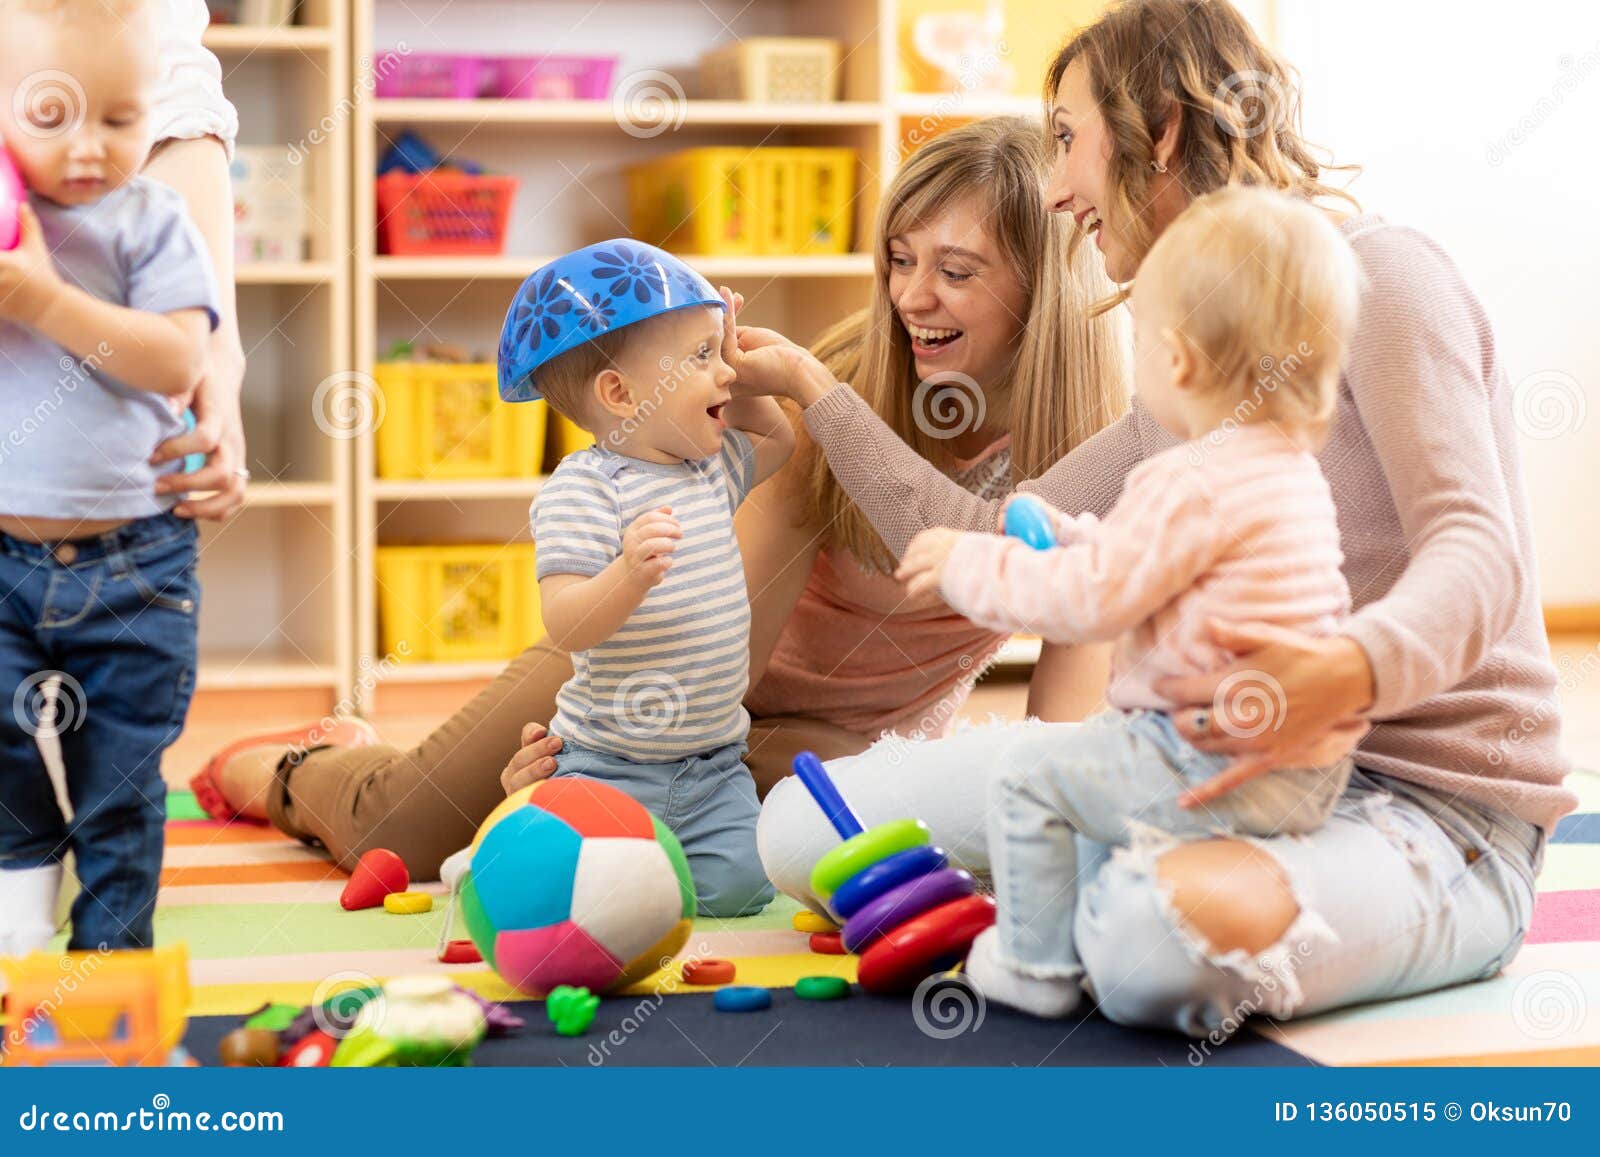 group of moms with their babies at playgroup